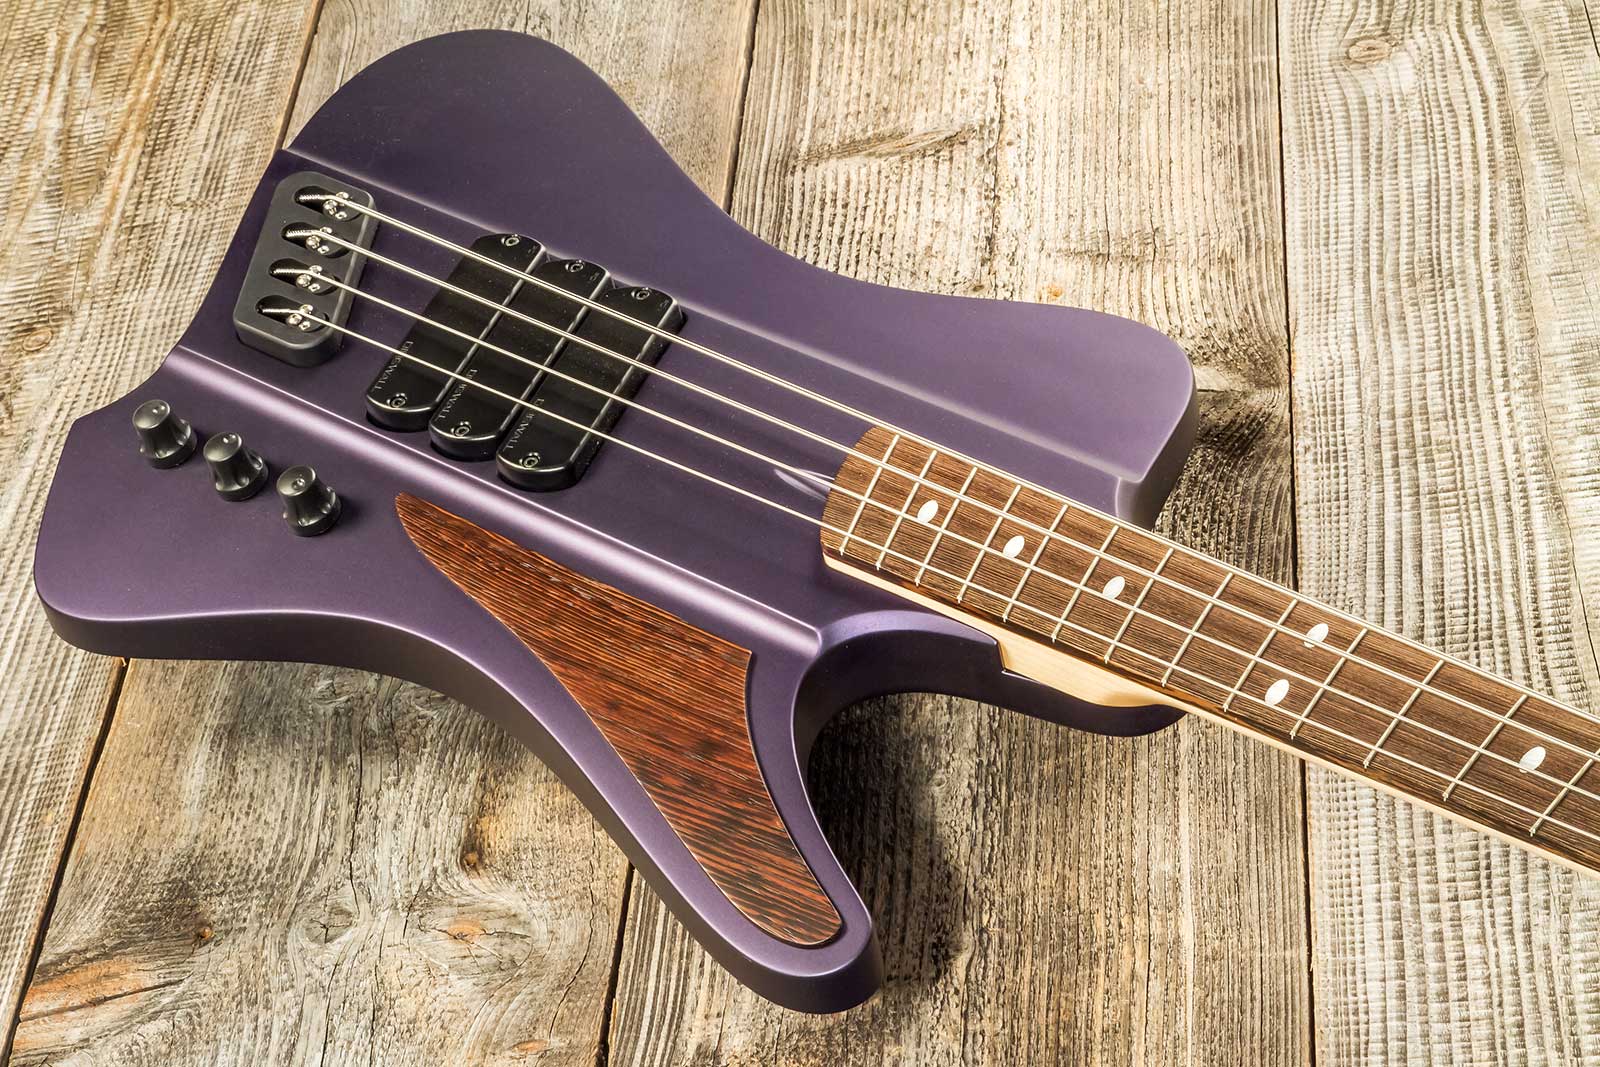 Dingwall Custom Shop D-roc 4c 3-pickups Wen #6982 - Purple To Faded Black - Solid body electric bass - Variation 2